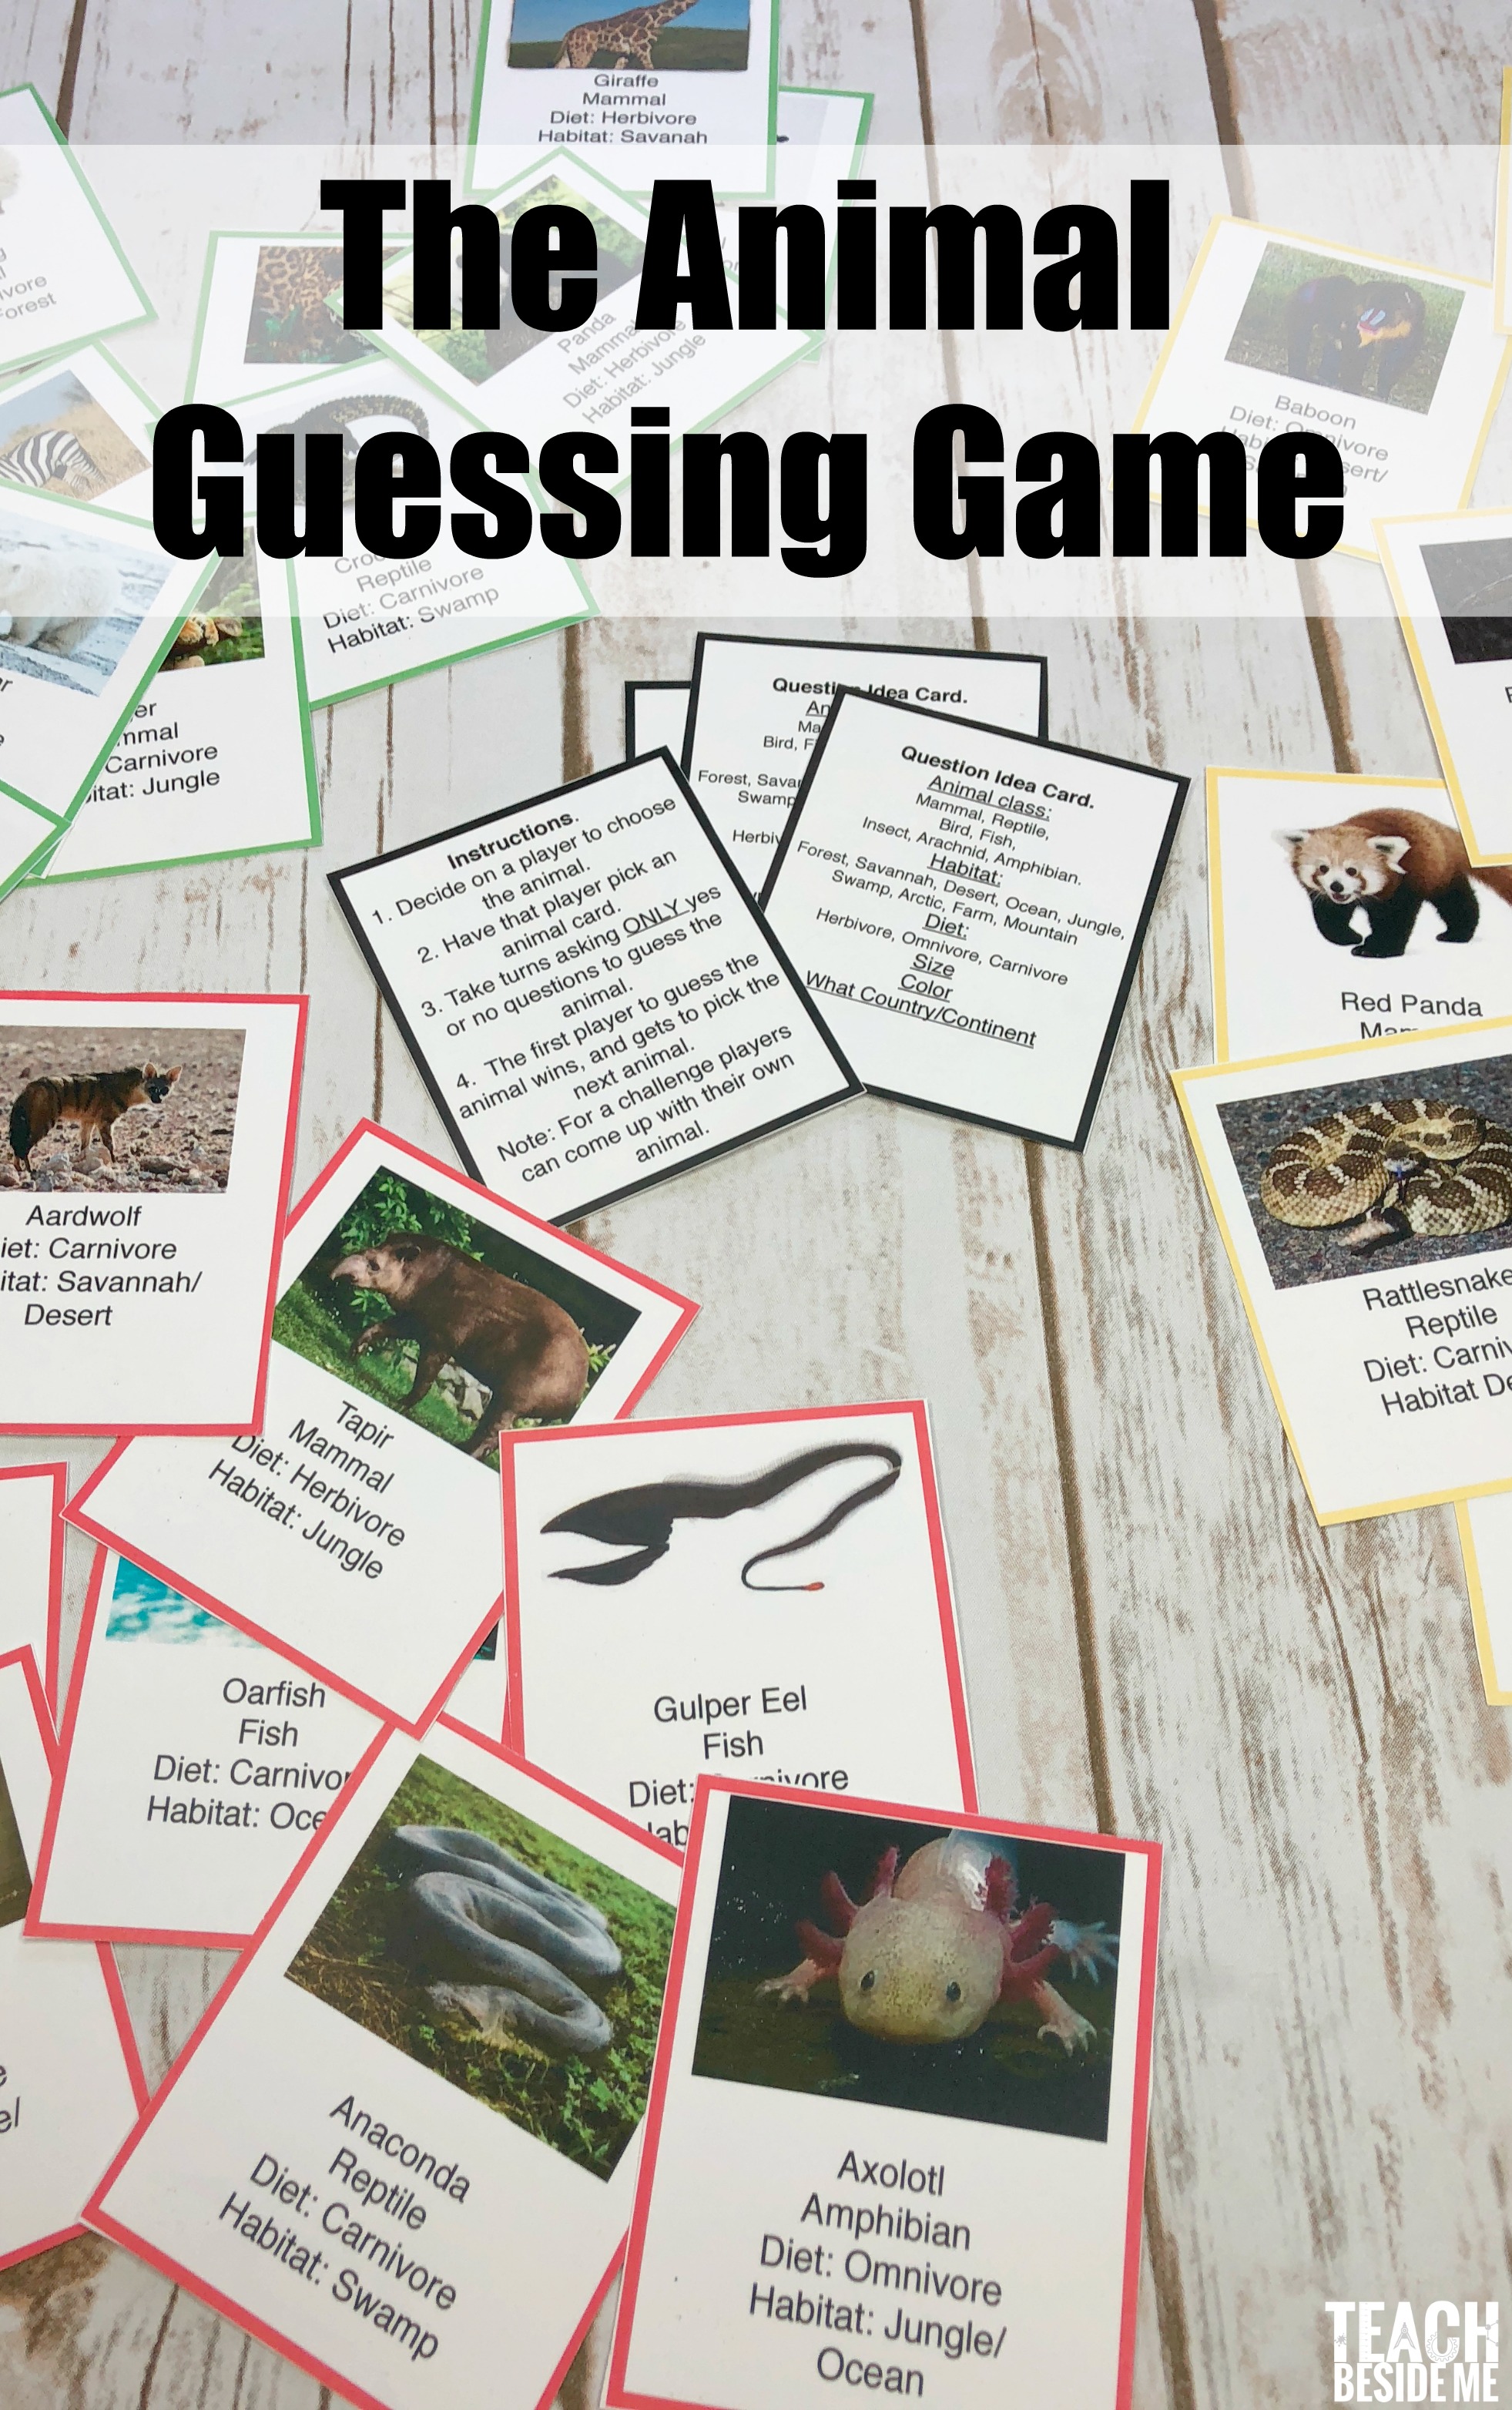 The Animal Guessing Game - Teach Beside Me